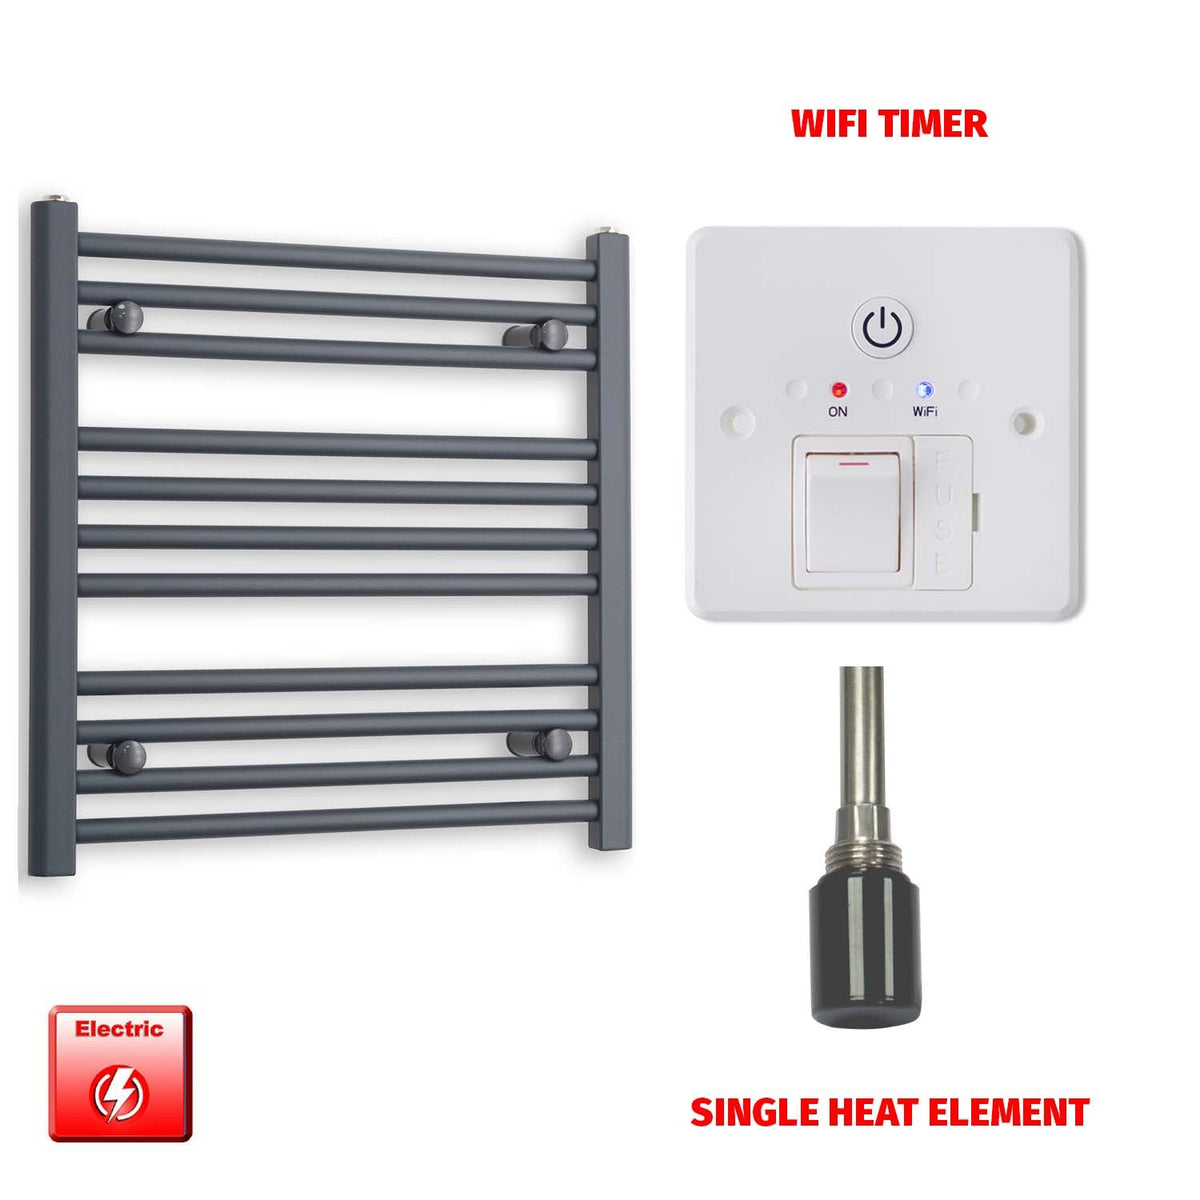 600mm High 600mm Wide Flat Anthracite Pre-Filled Electric Heated Towel Rail Radiator HTR Single heat element Wifi timer